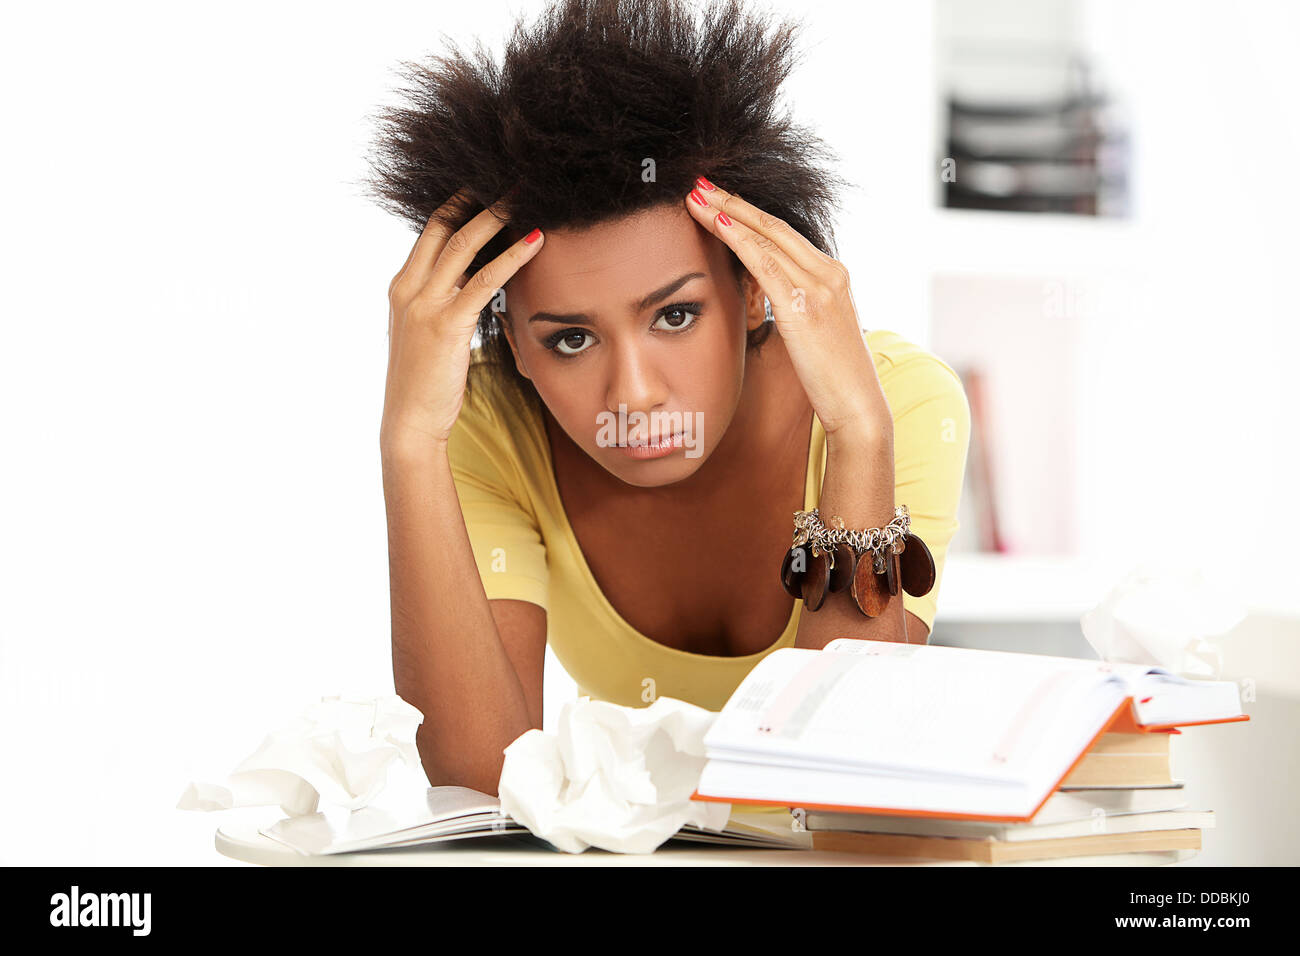 Young black woman tired from studying Stock Photo